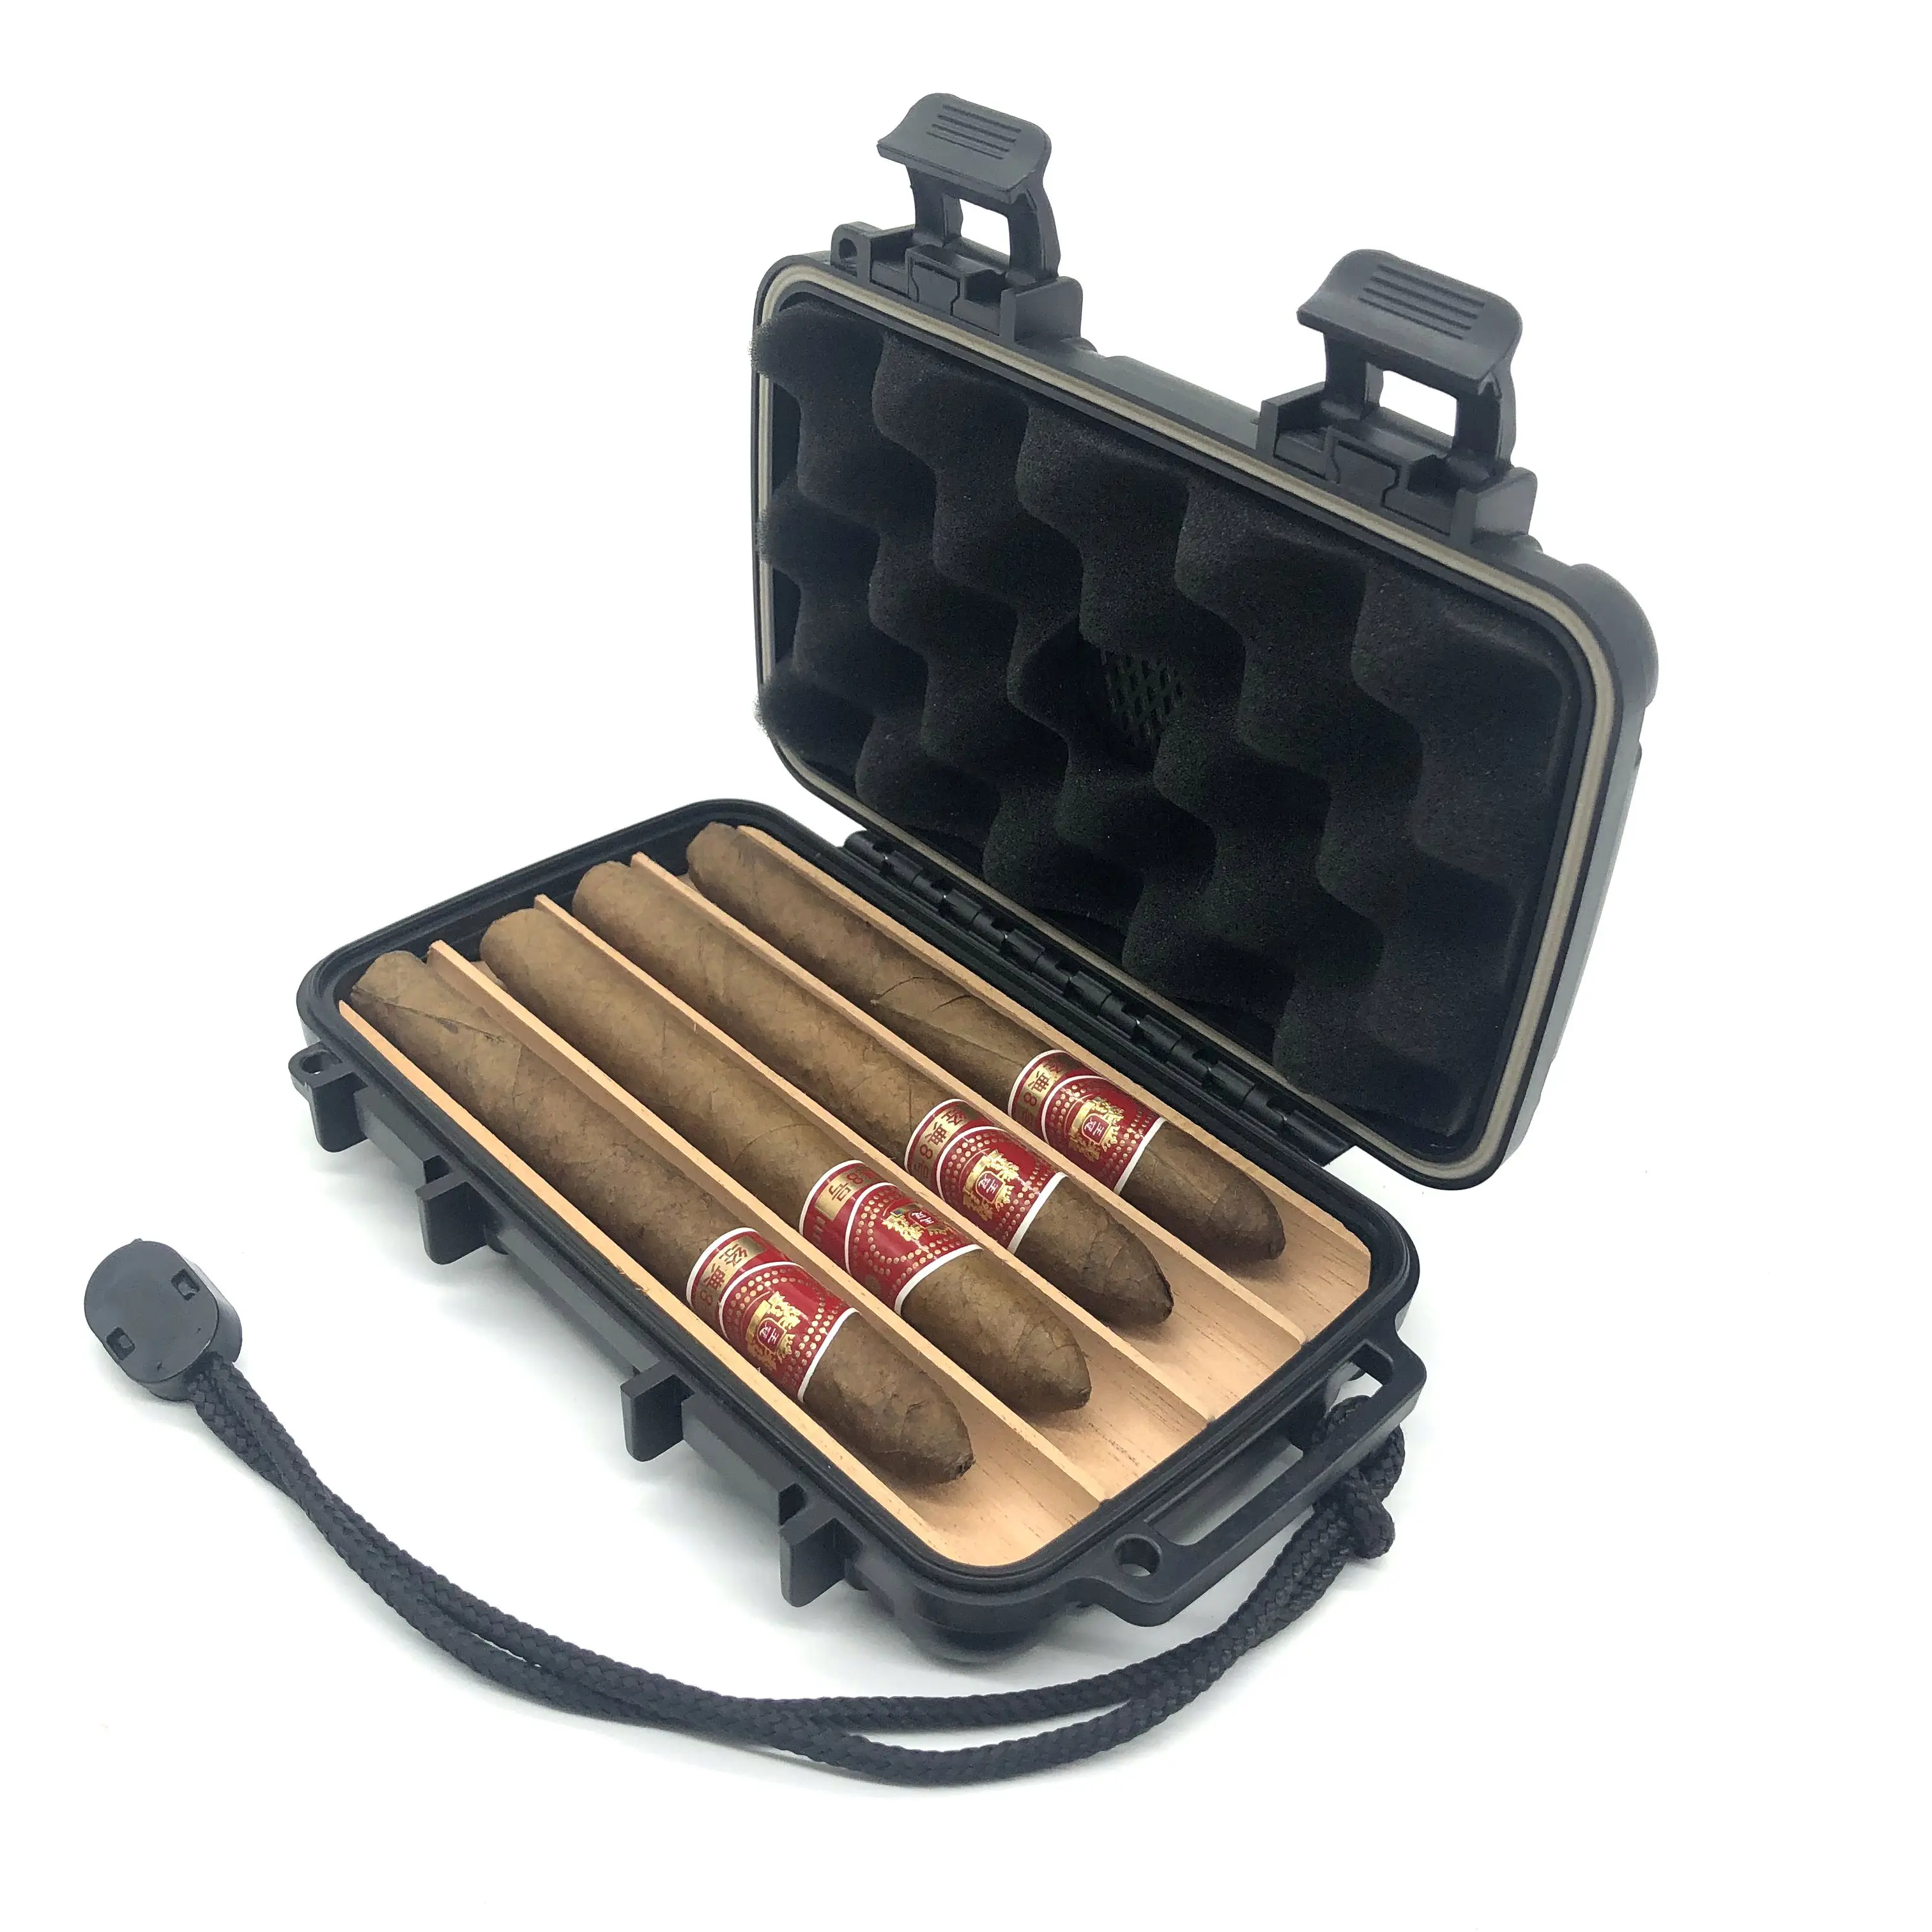 

Cigar Holder Case Manufacturer Wholesale Cedar Wood Box Smoking Tools Case with Humidor for 4 Sticks Frosted Carton 30pcs Ppbag, Accept custom color